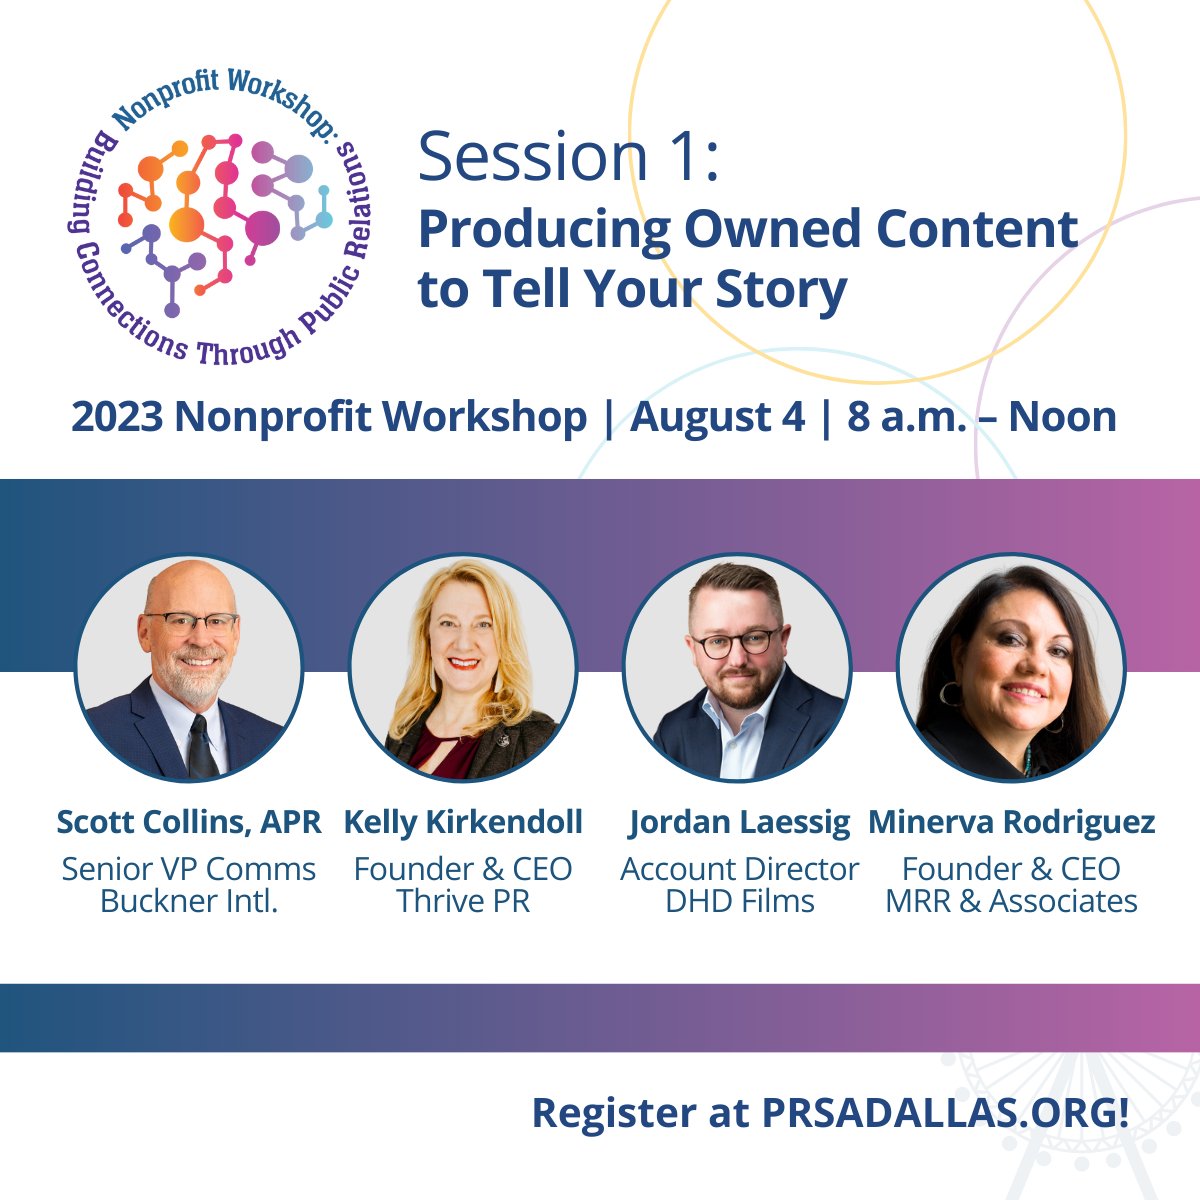 Join us on August 4 at 9 AM for the PRSA Dallas 2023 Nonprofit Workshop’s first session – PRODUCING OWNED CONTENT TO TELL YOUR STORY. Our panel of content creators will answer all your questions and offer their best practices in this 45-min. session! bit.ly/PRSANonprofit23